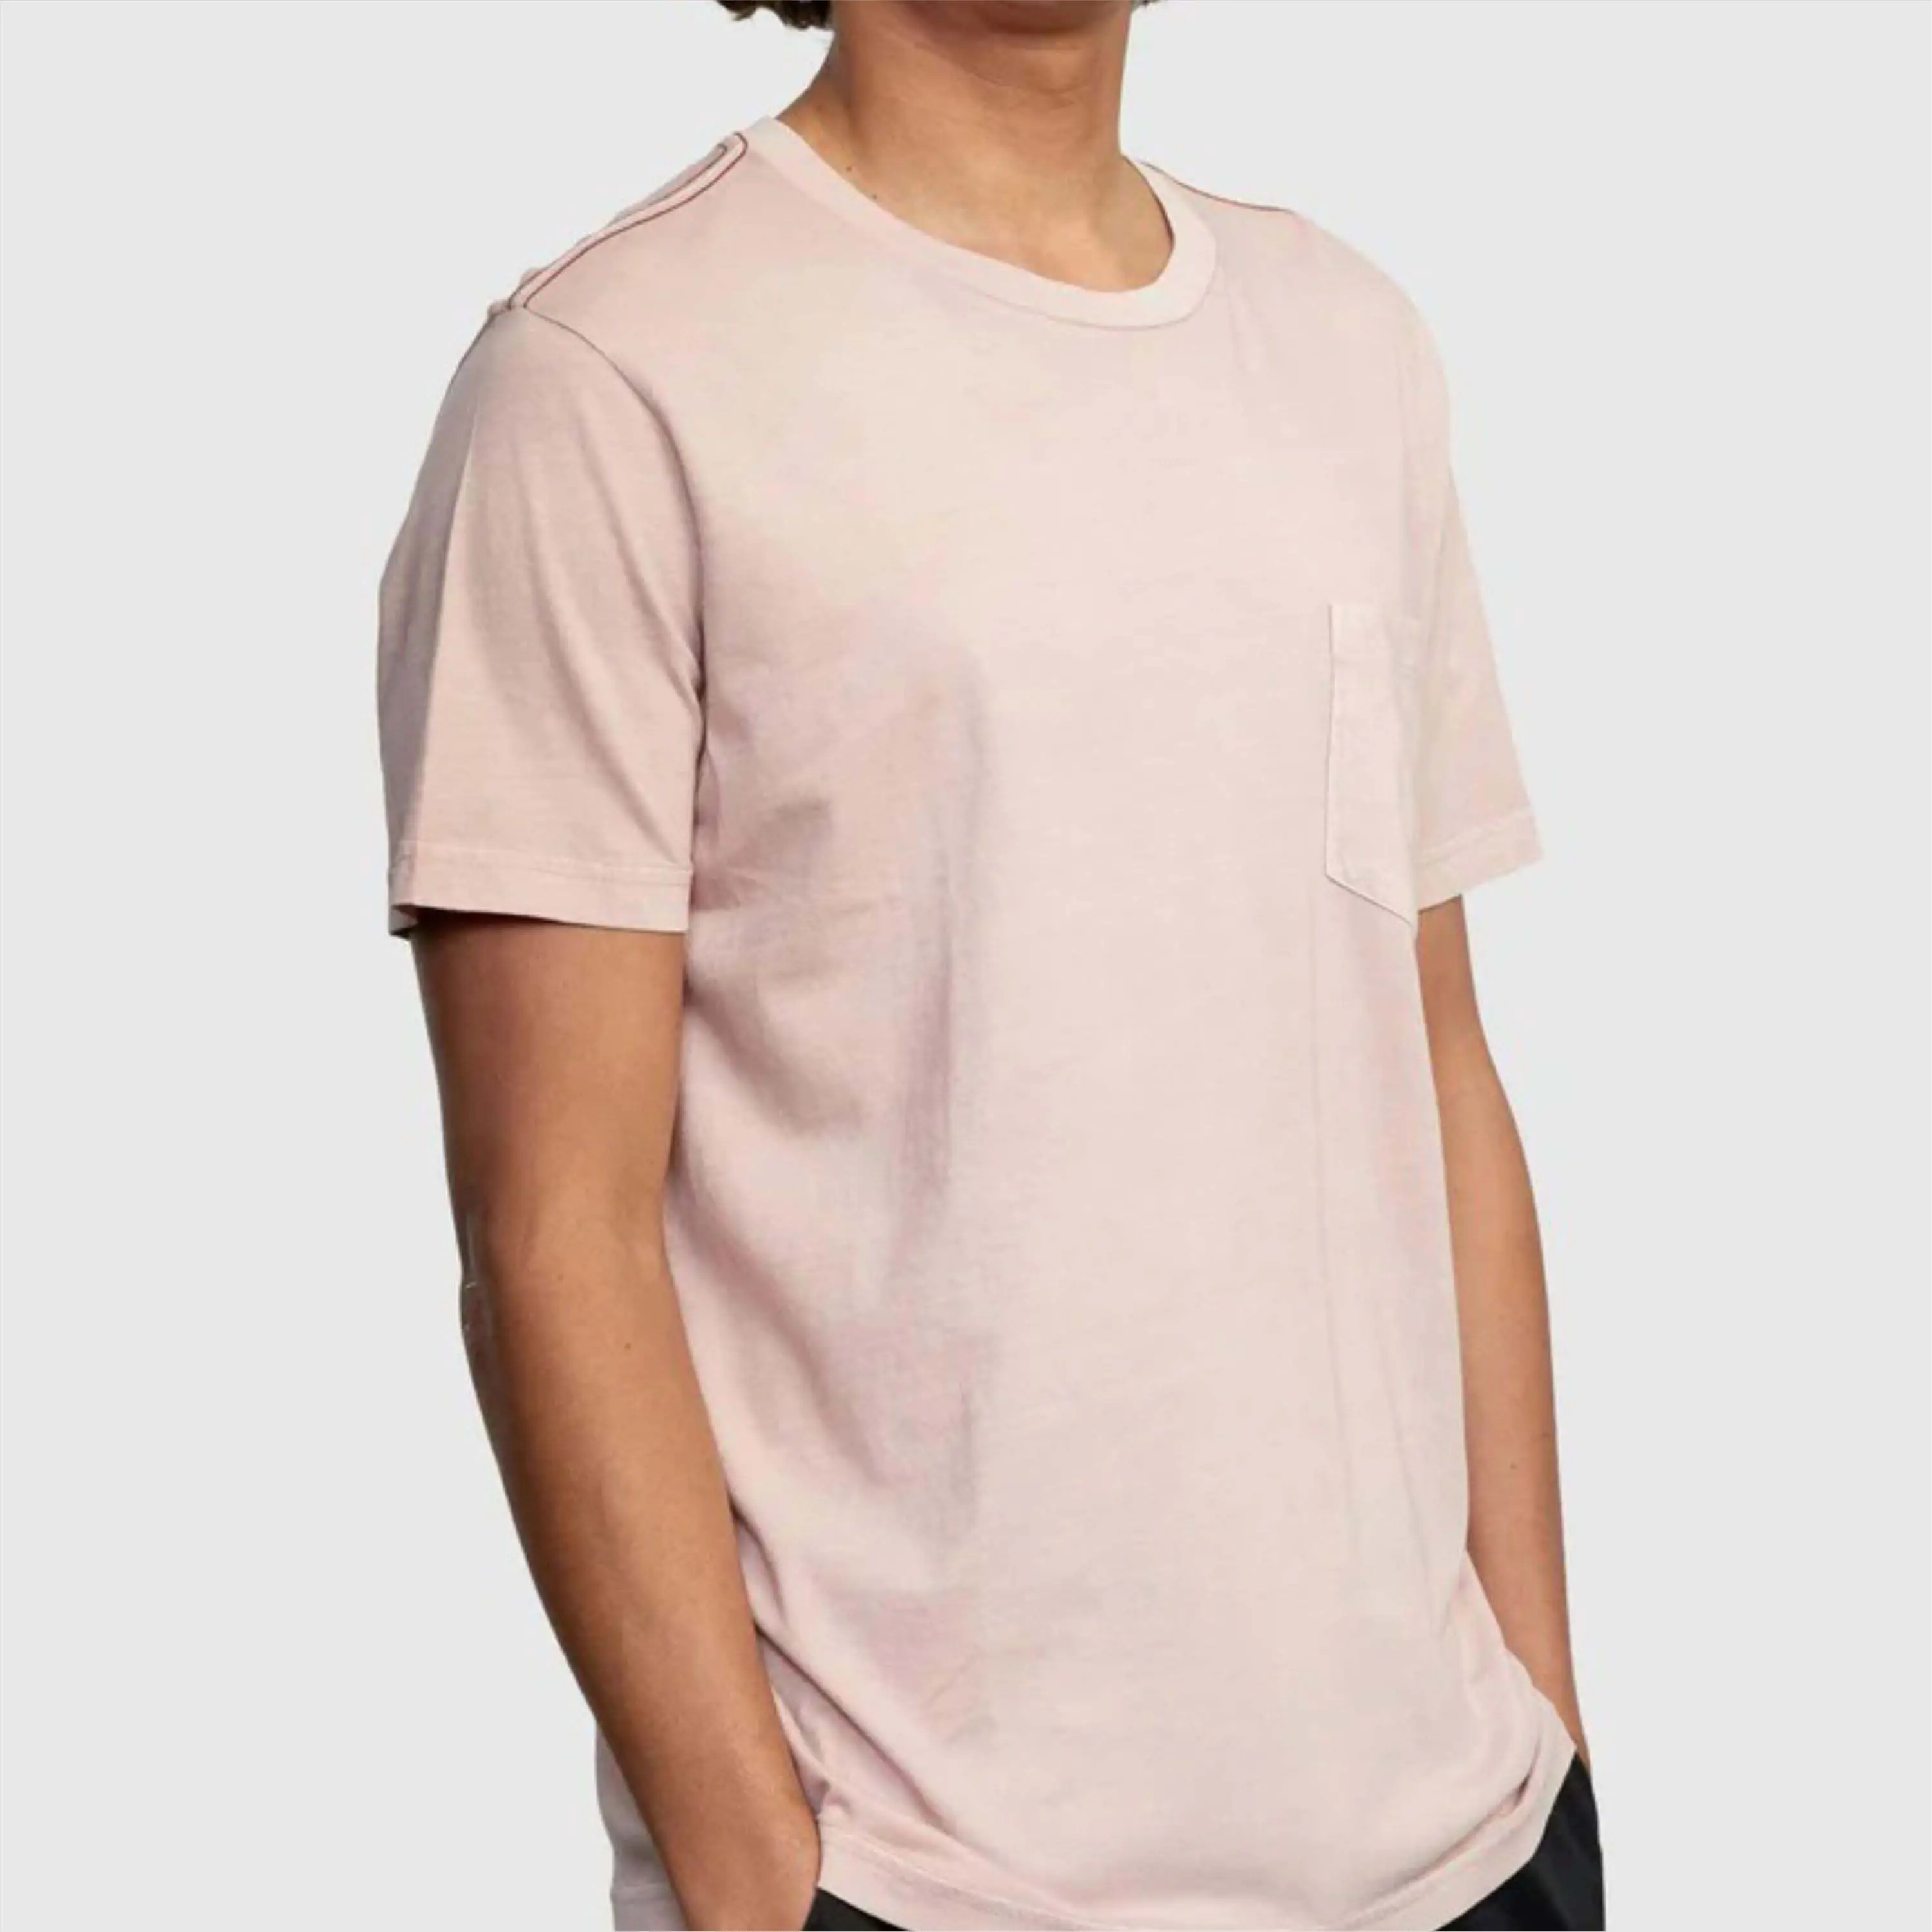 Trendsetter's Choice: Men's Fashionable Pigment-Dye T-Shirt - Modern, Versatile, Perfect for Casual Chic Looks